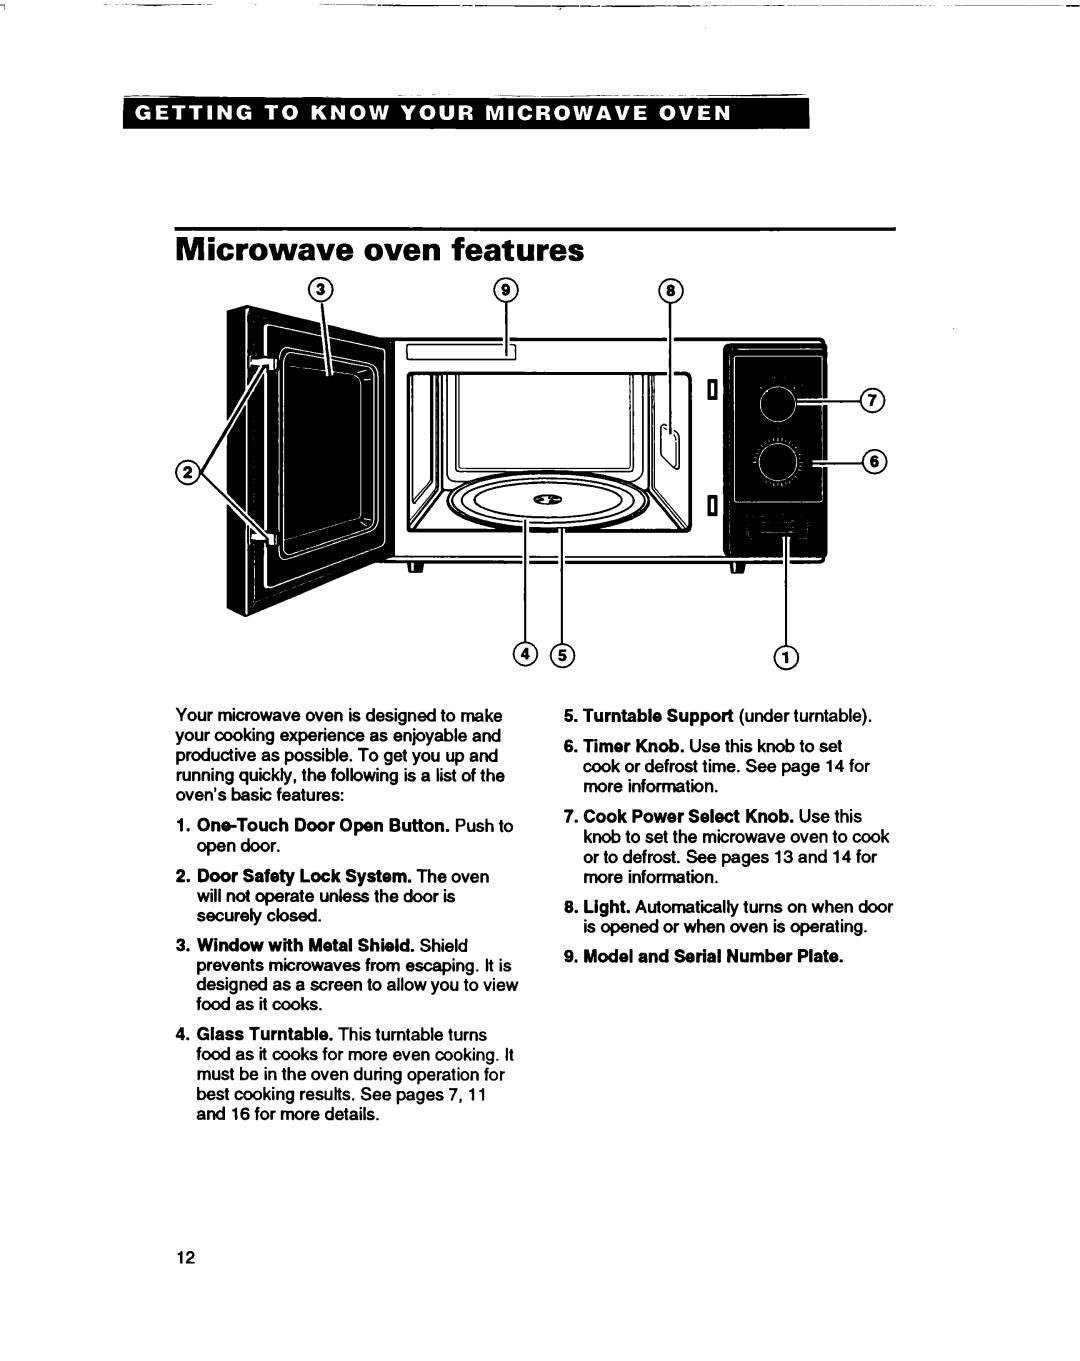 Whirlpool MT0060XB Microwave oven features, Turntable Support under turntable, Model and Serial Number Plate 